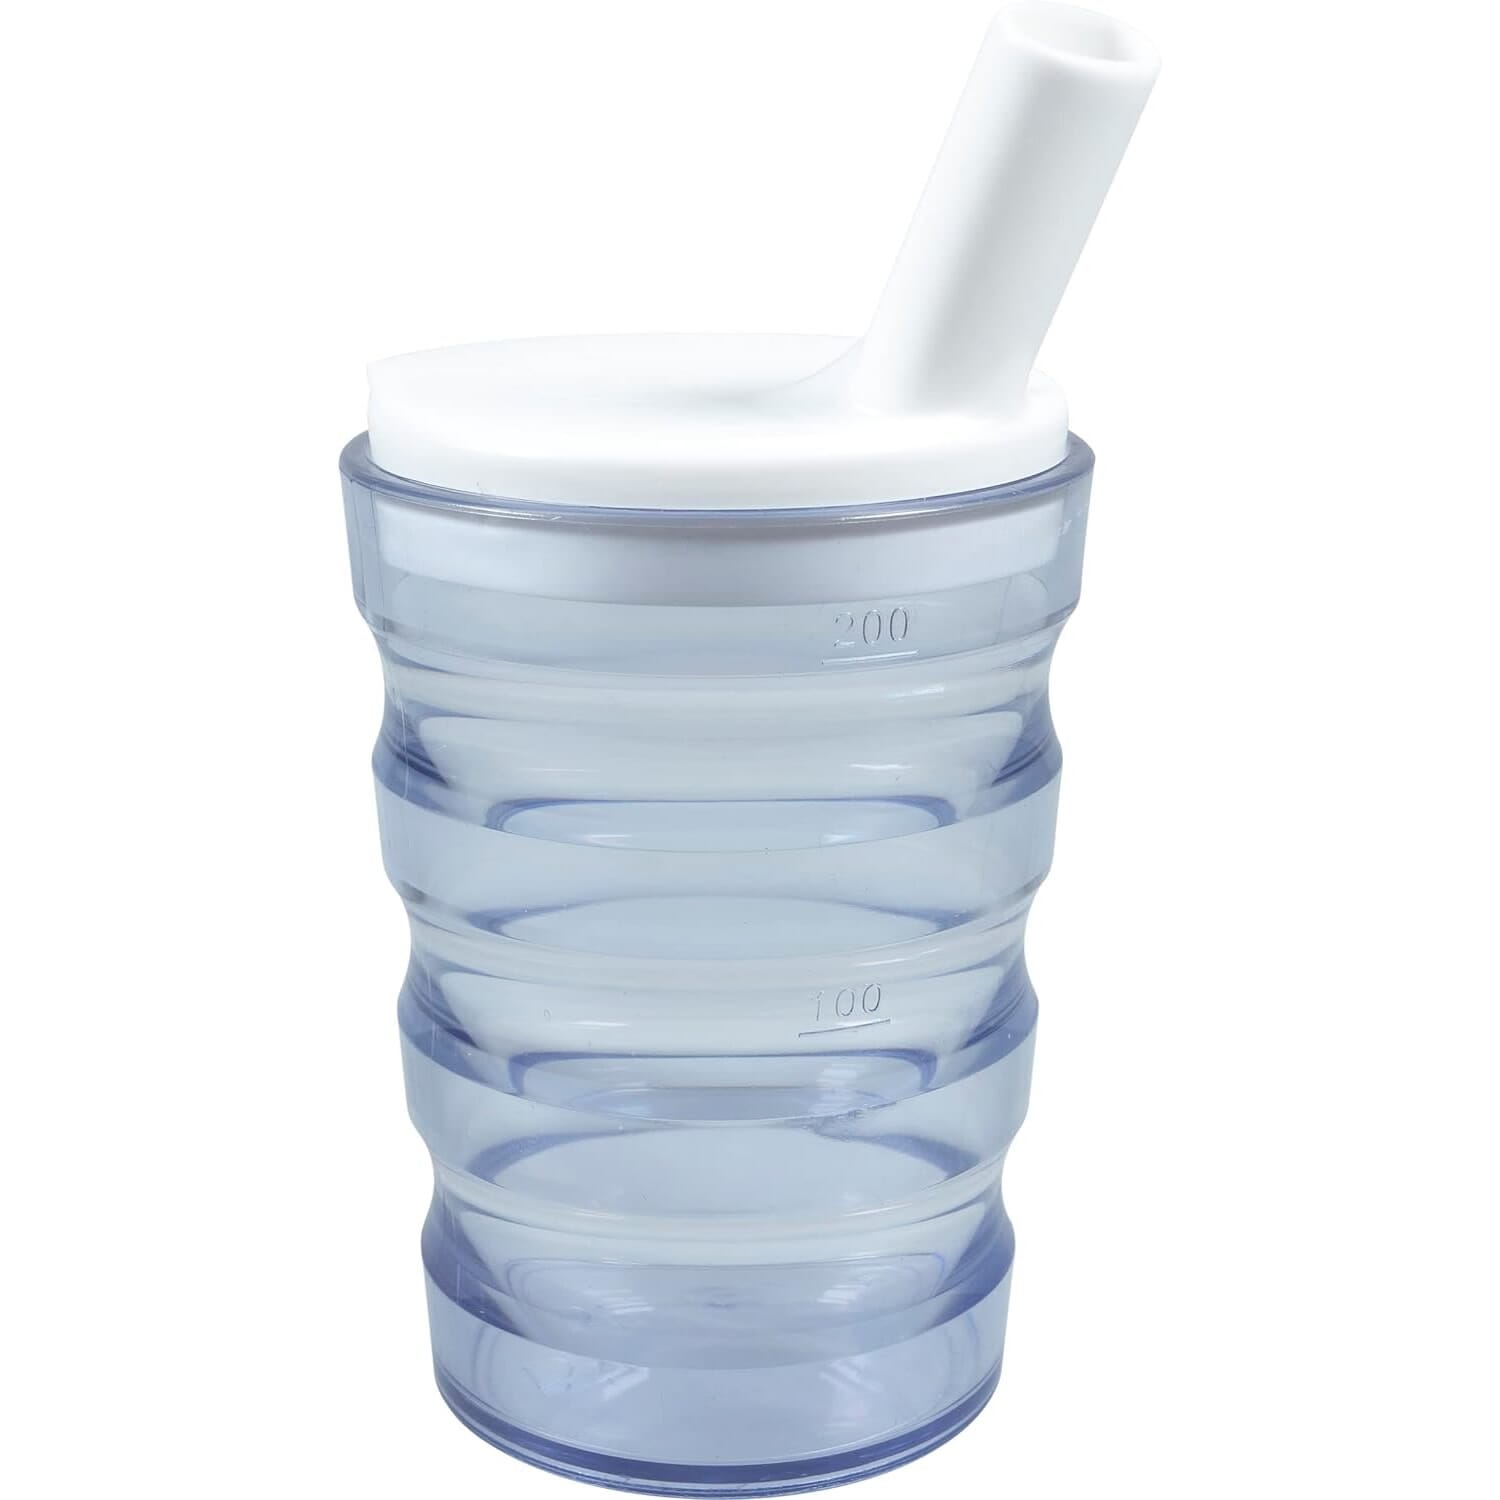 View Easy Grip Ribbed Beaker 200ml Single Clear information